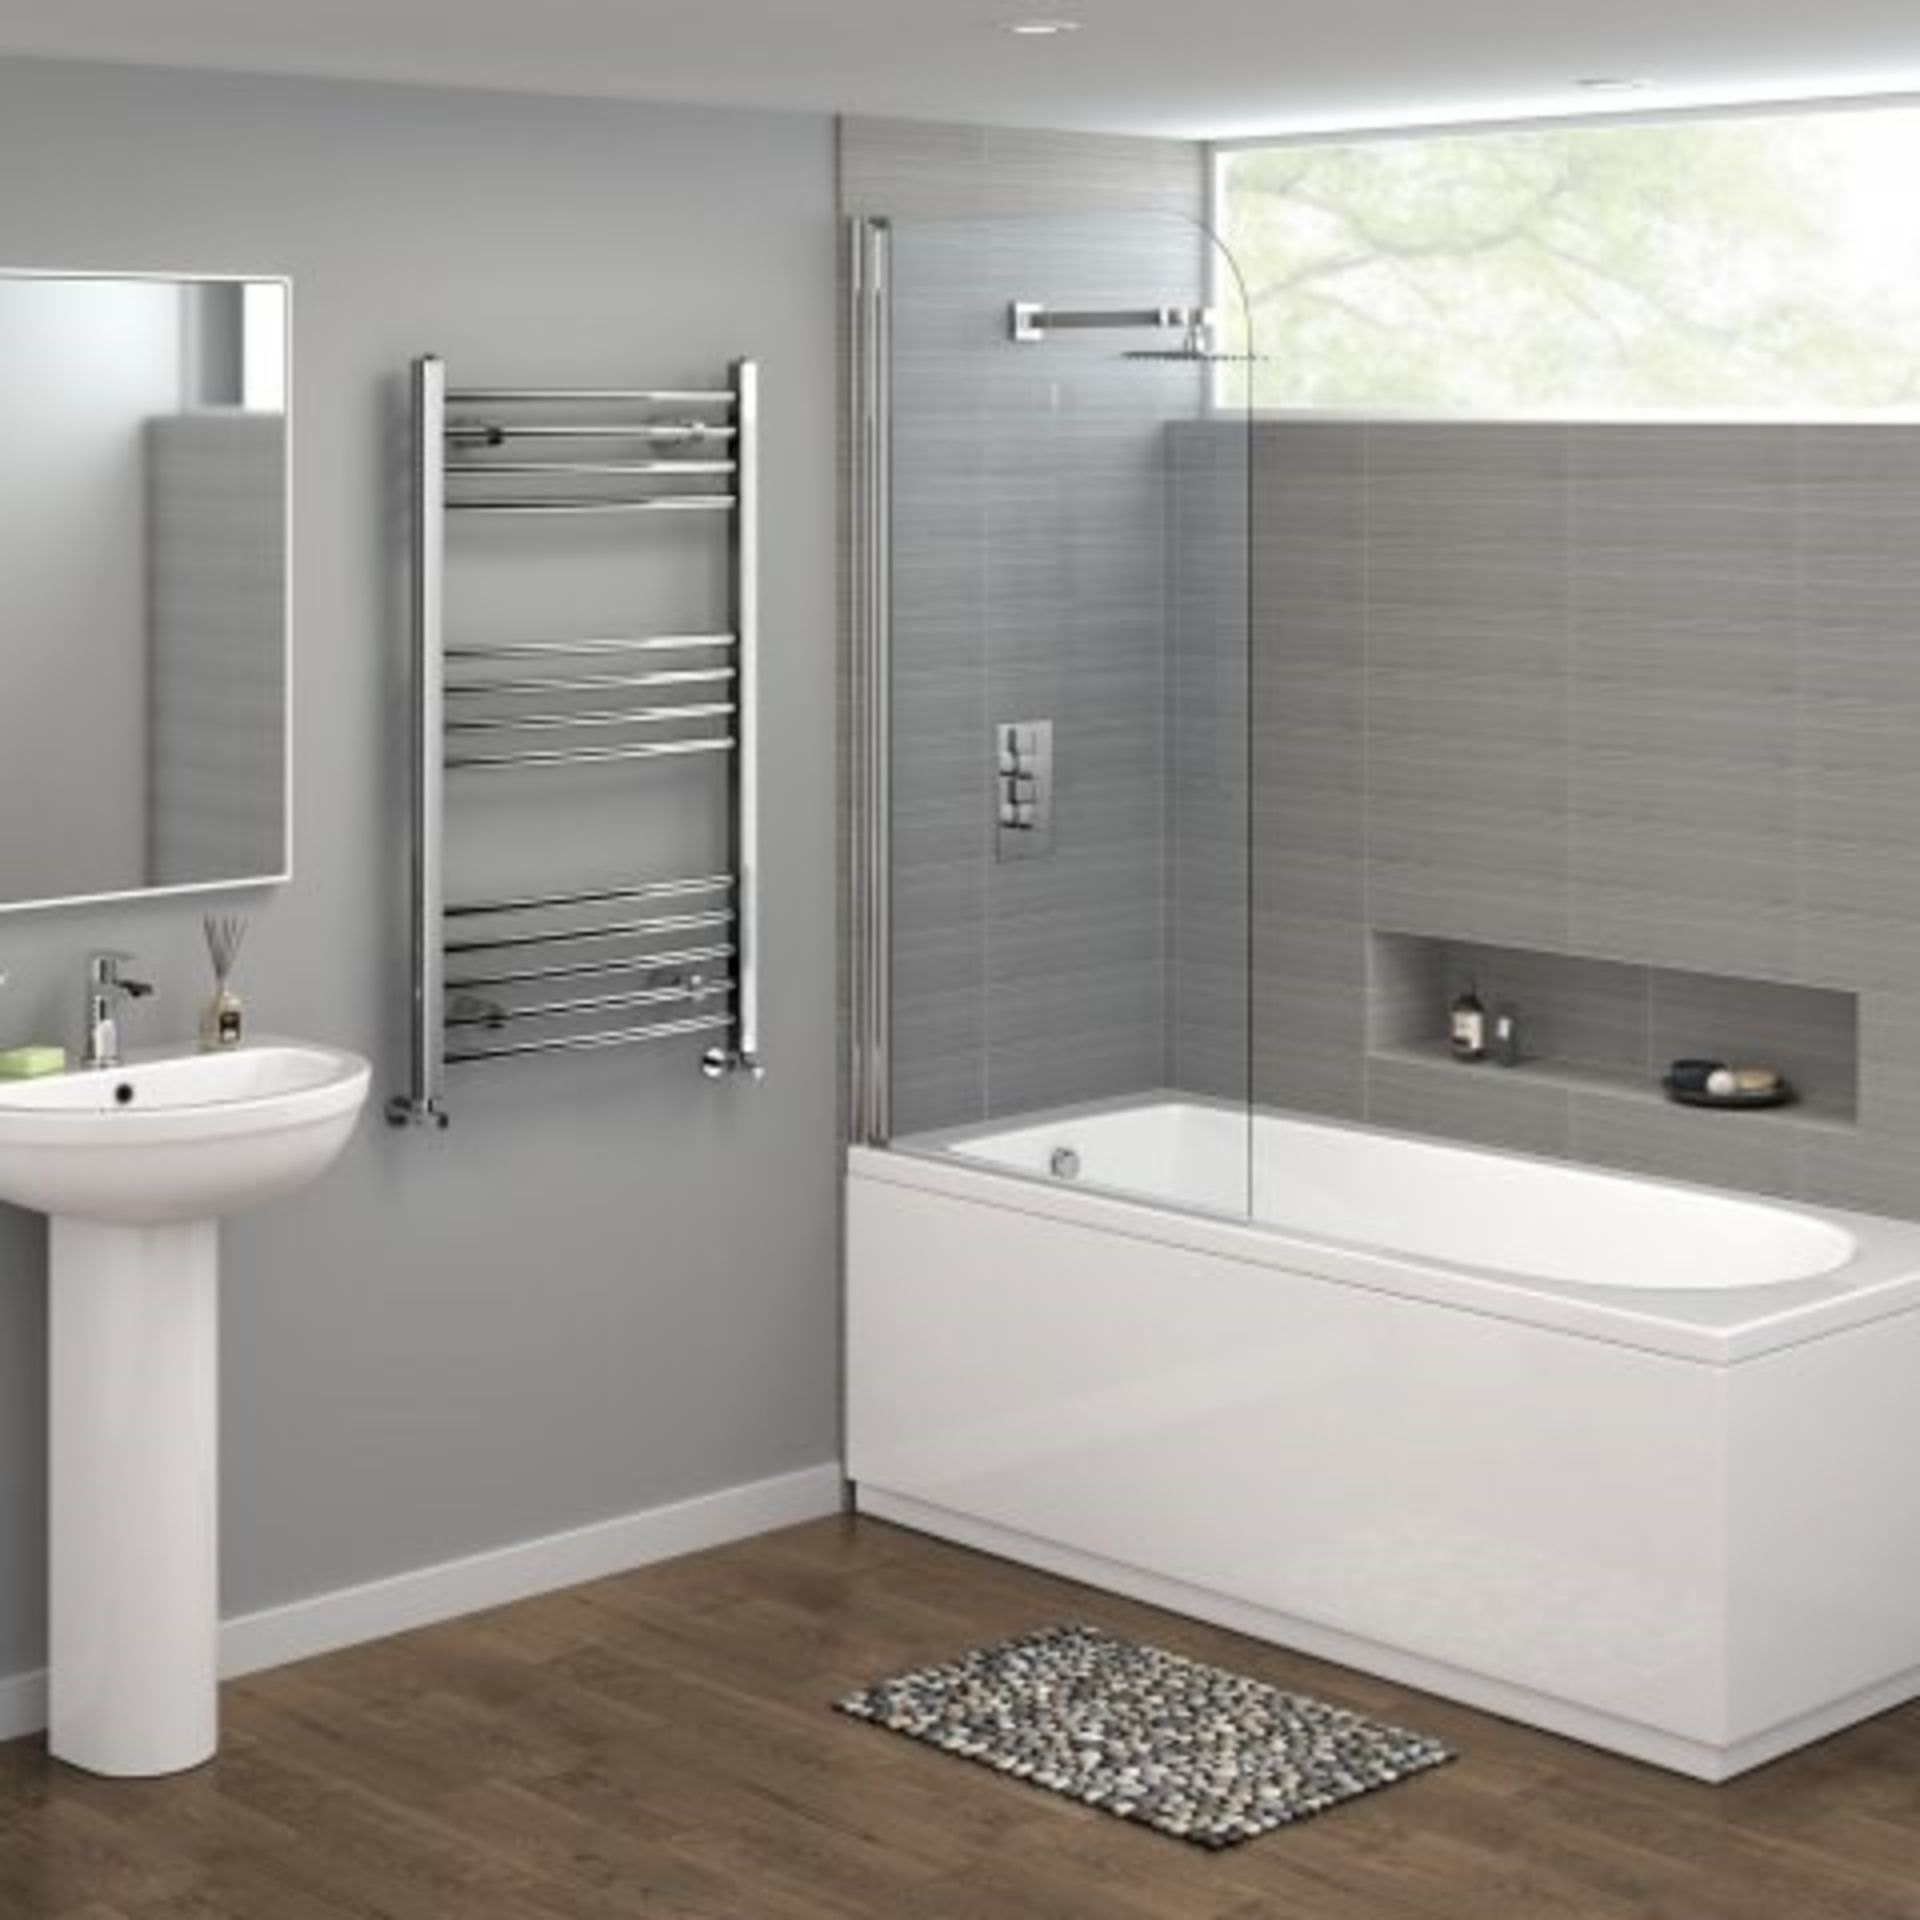 New 1200x500mm - 20mm Tubes - RRP £219.99.Chrome Curved Rail Ladder Towel Radiator. O... - Image 2 of 2